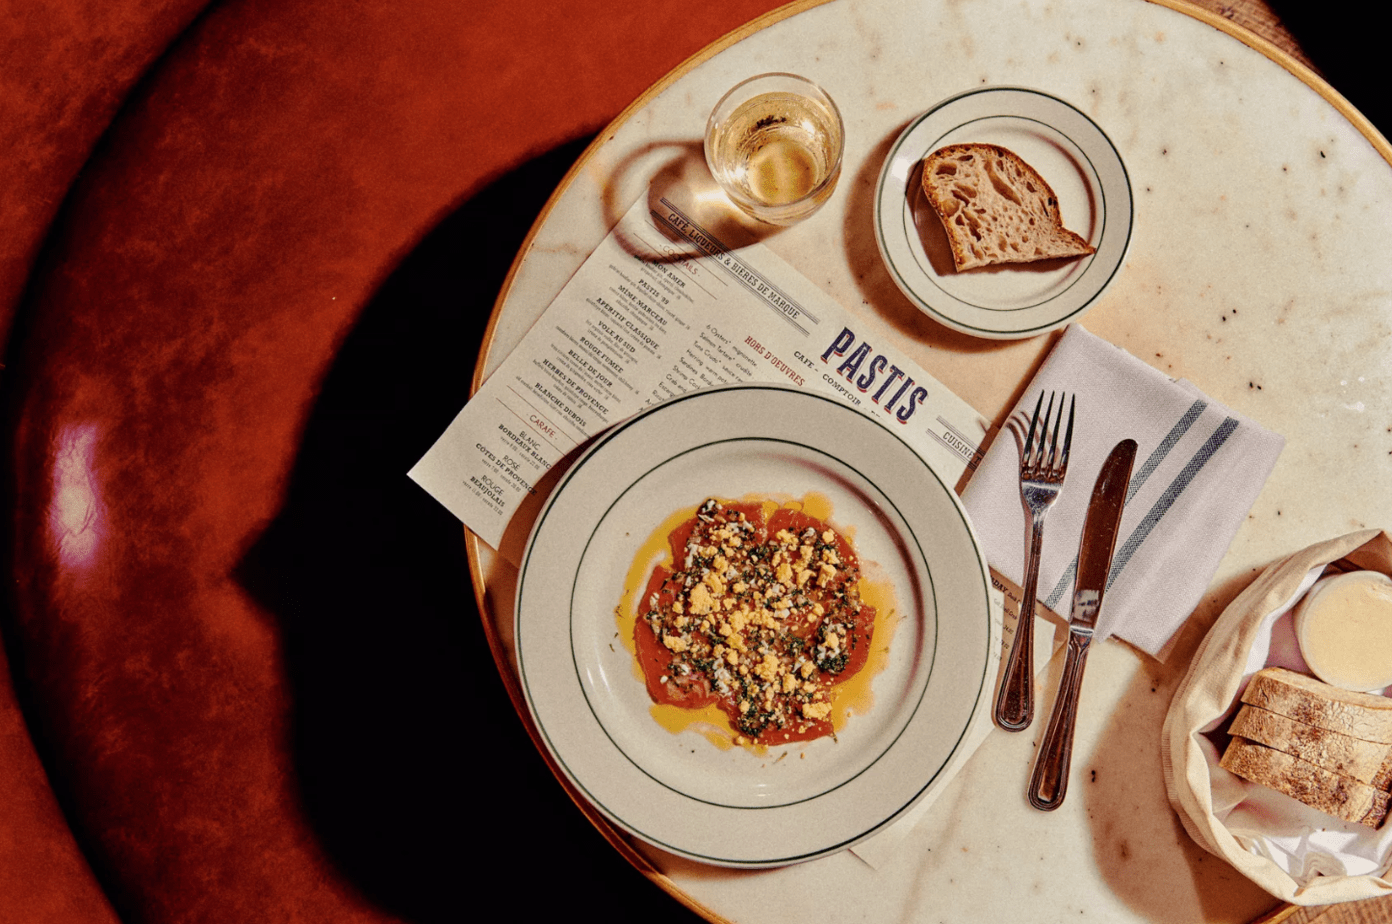 Food from Pastis in NYC reopening in July 2019